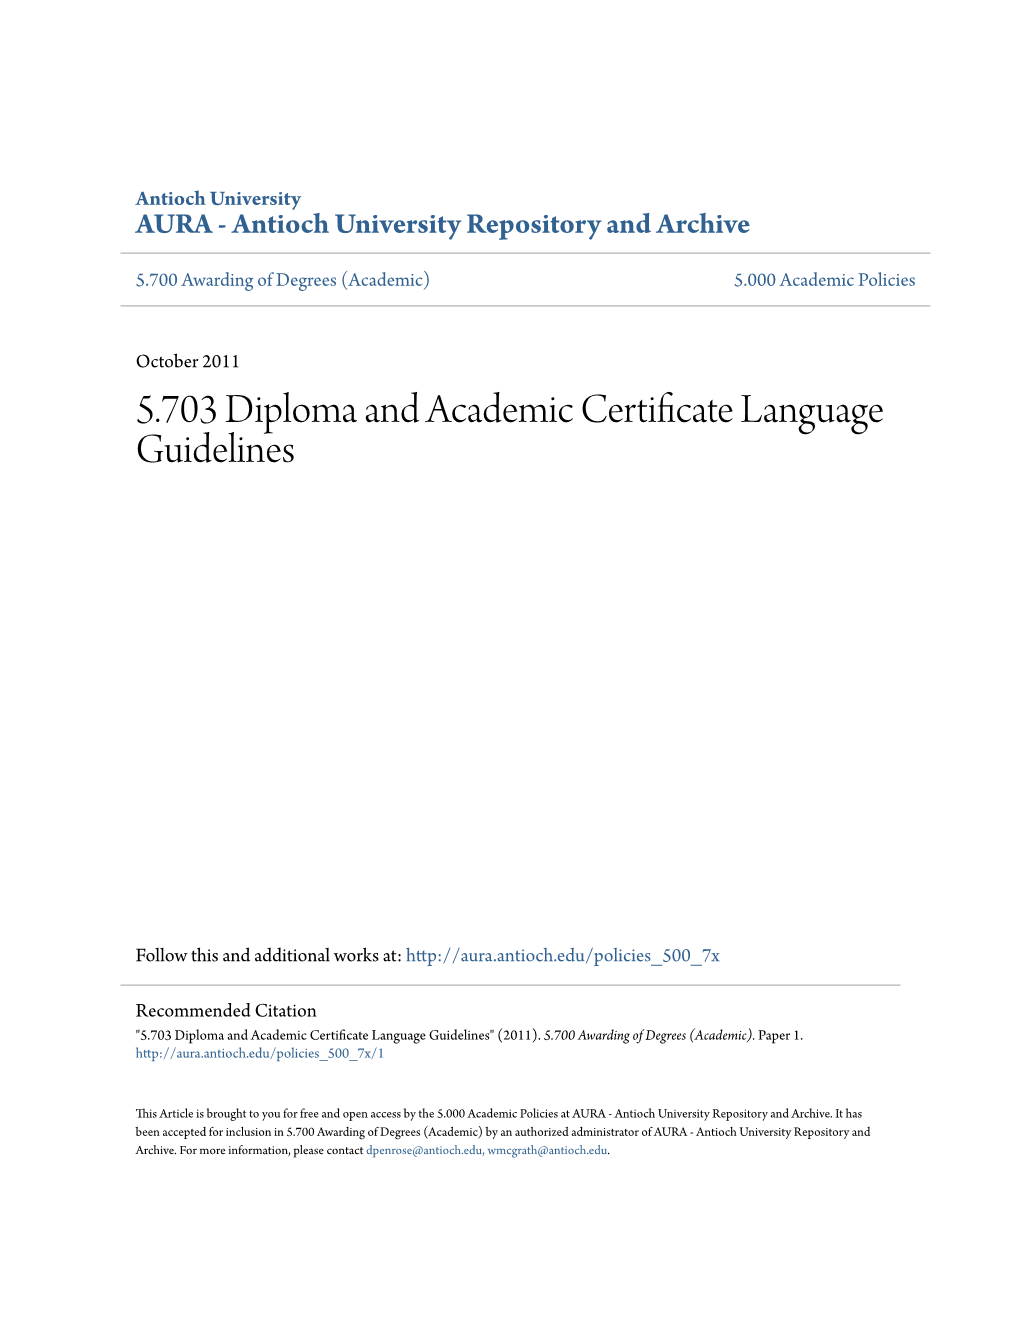 5.703 Diploma and Academic Certificate Language Guidelines